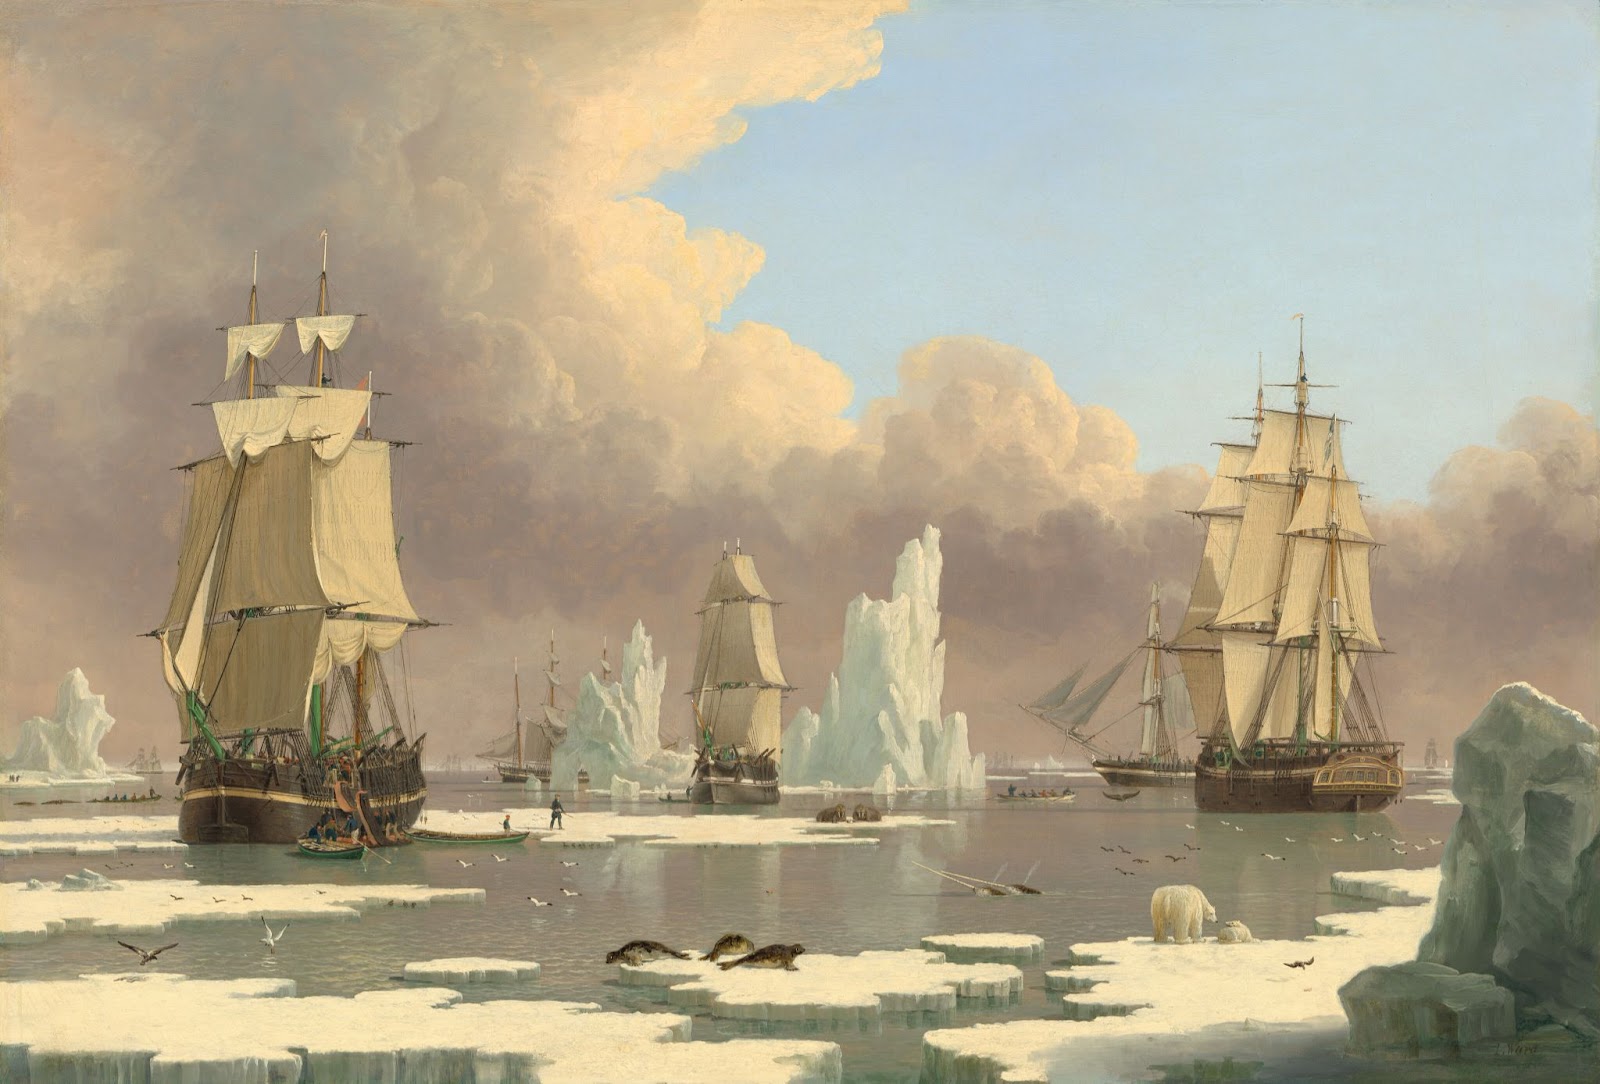 Oil painting of whale ships in a icy region surrounded by marine life.